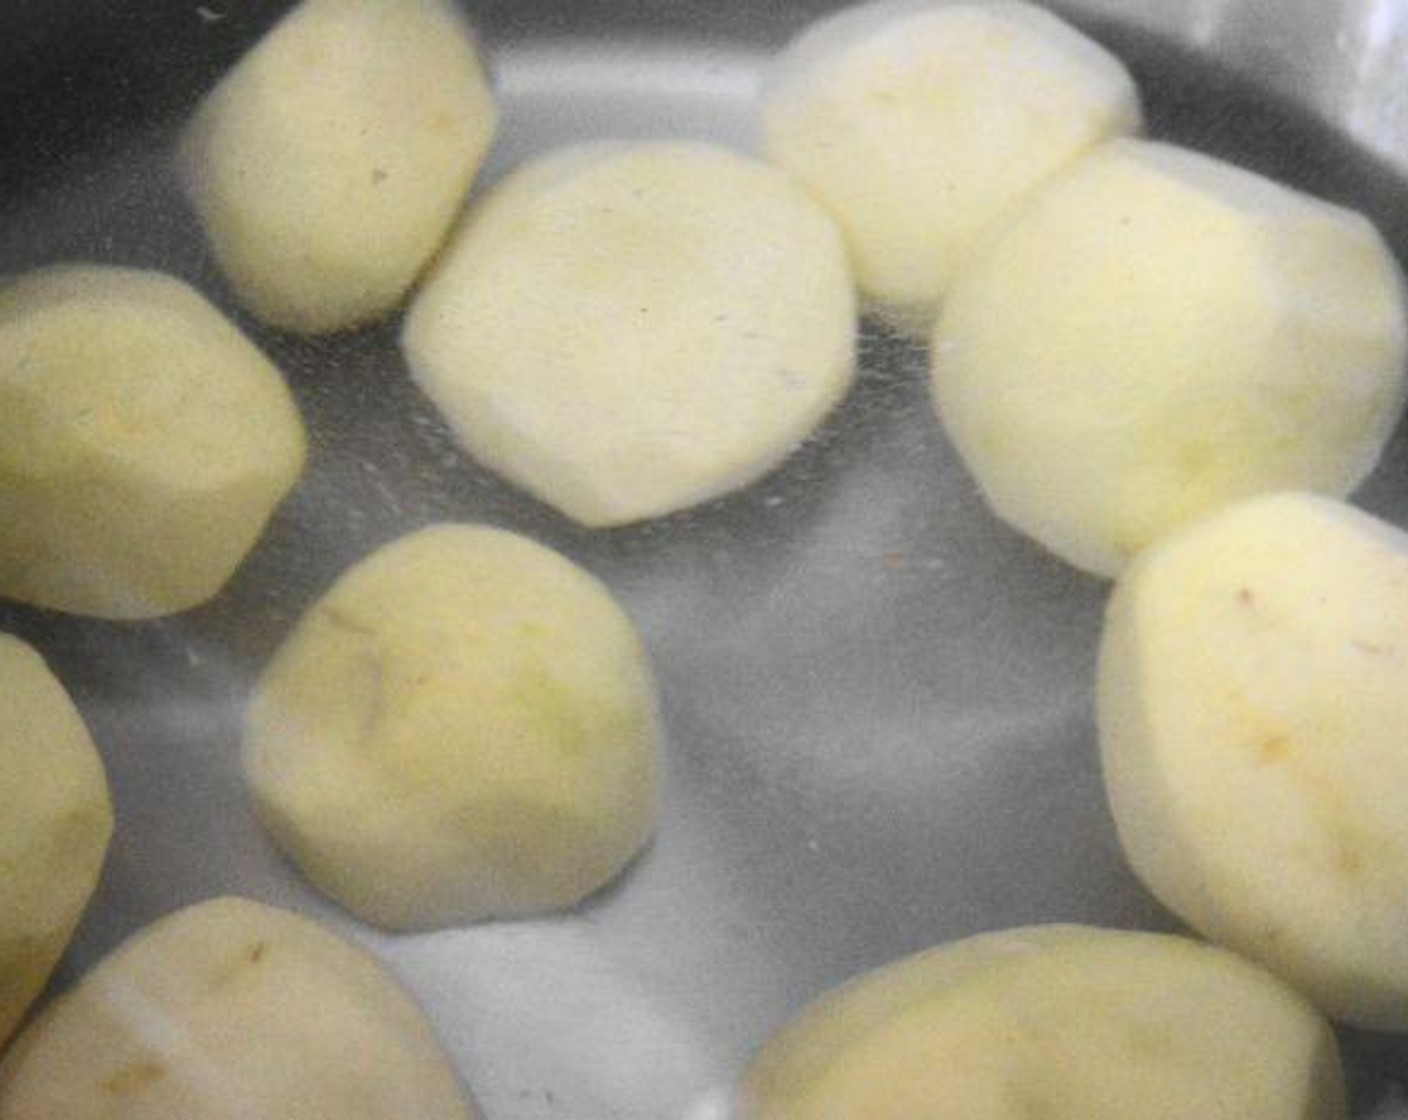 step 1 Get a large pot of water on the stove, then add the Yukon Gold Potatoes (10) and a big pinch of Kosher Salt (1 pinch) to it. Bring the pot to a boil and let the potatoes cook until tender for about 20-25 minutes.